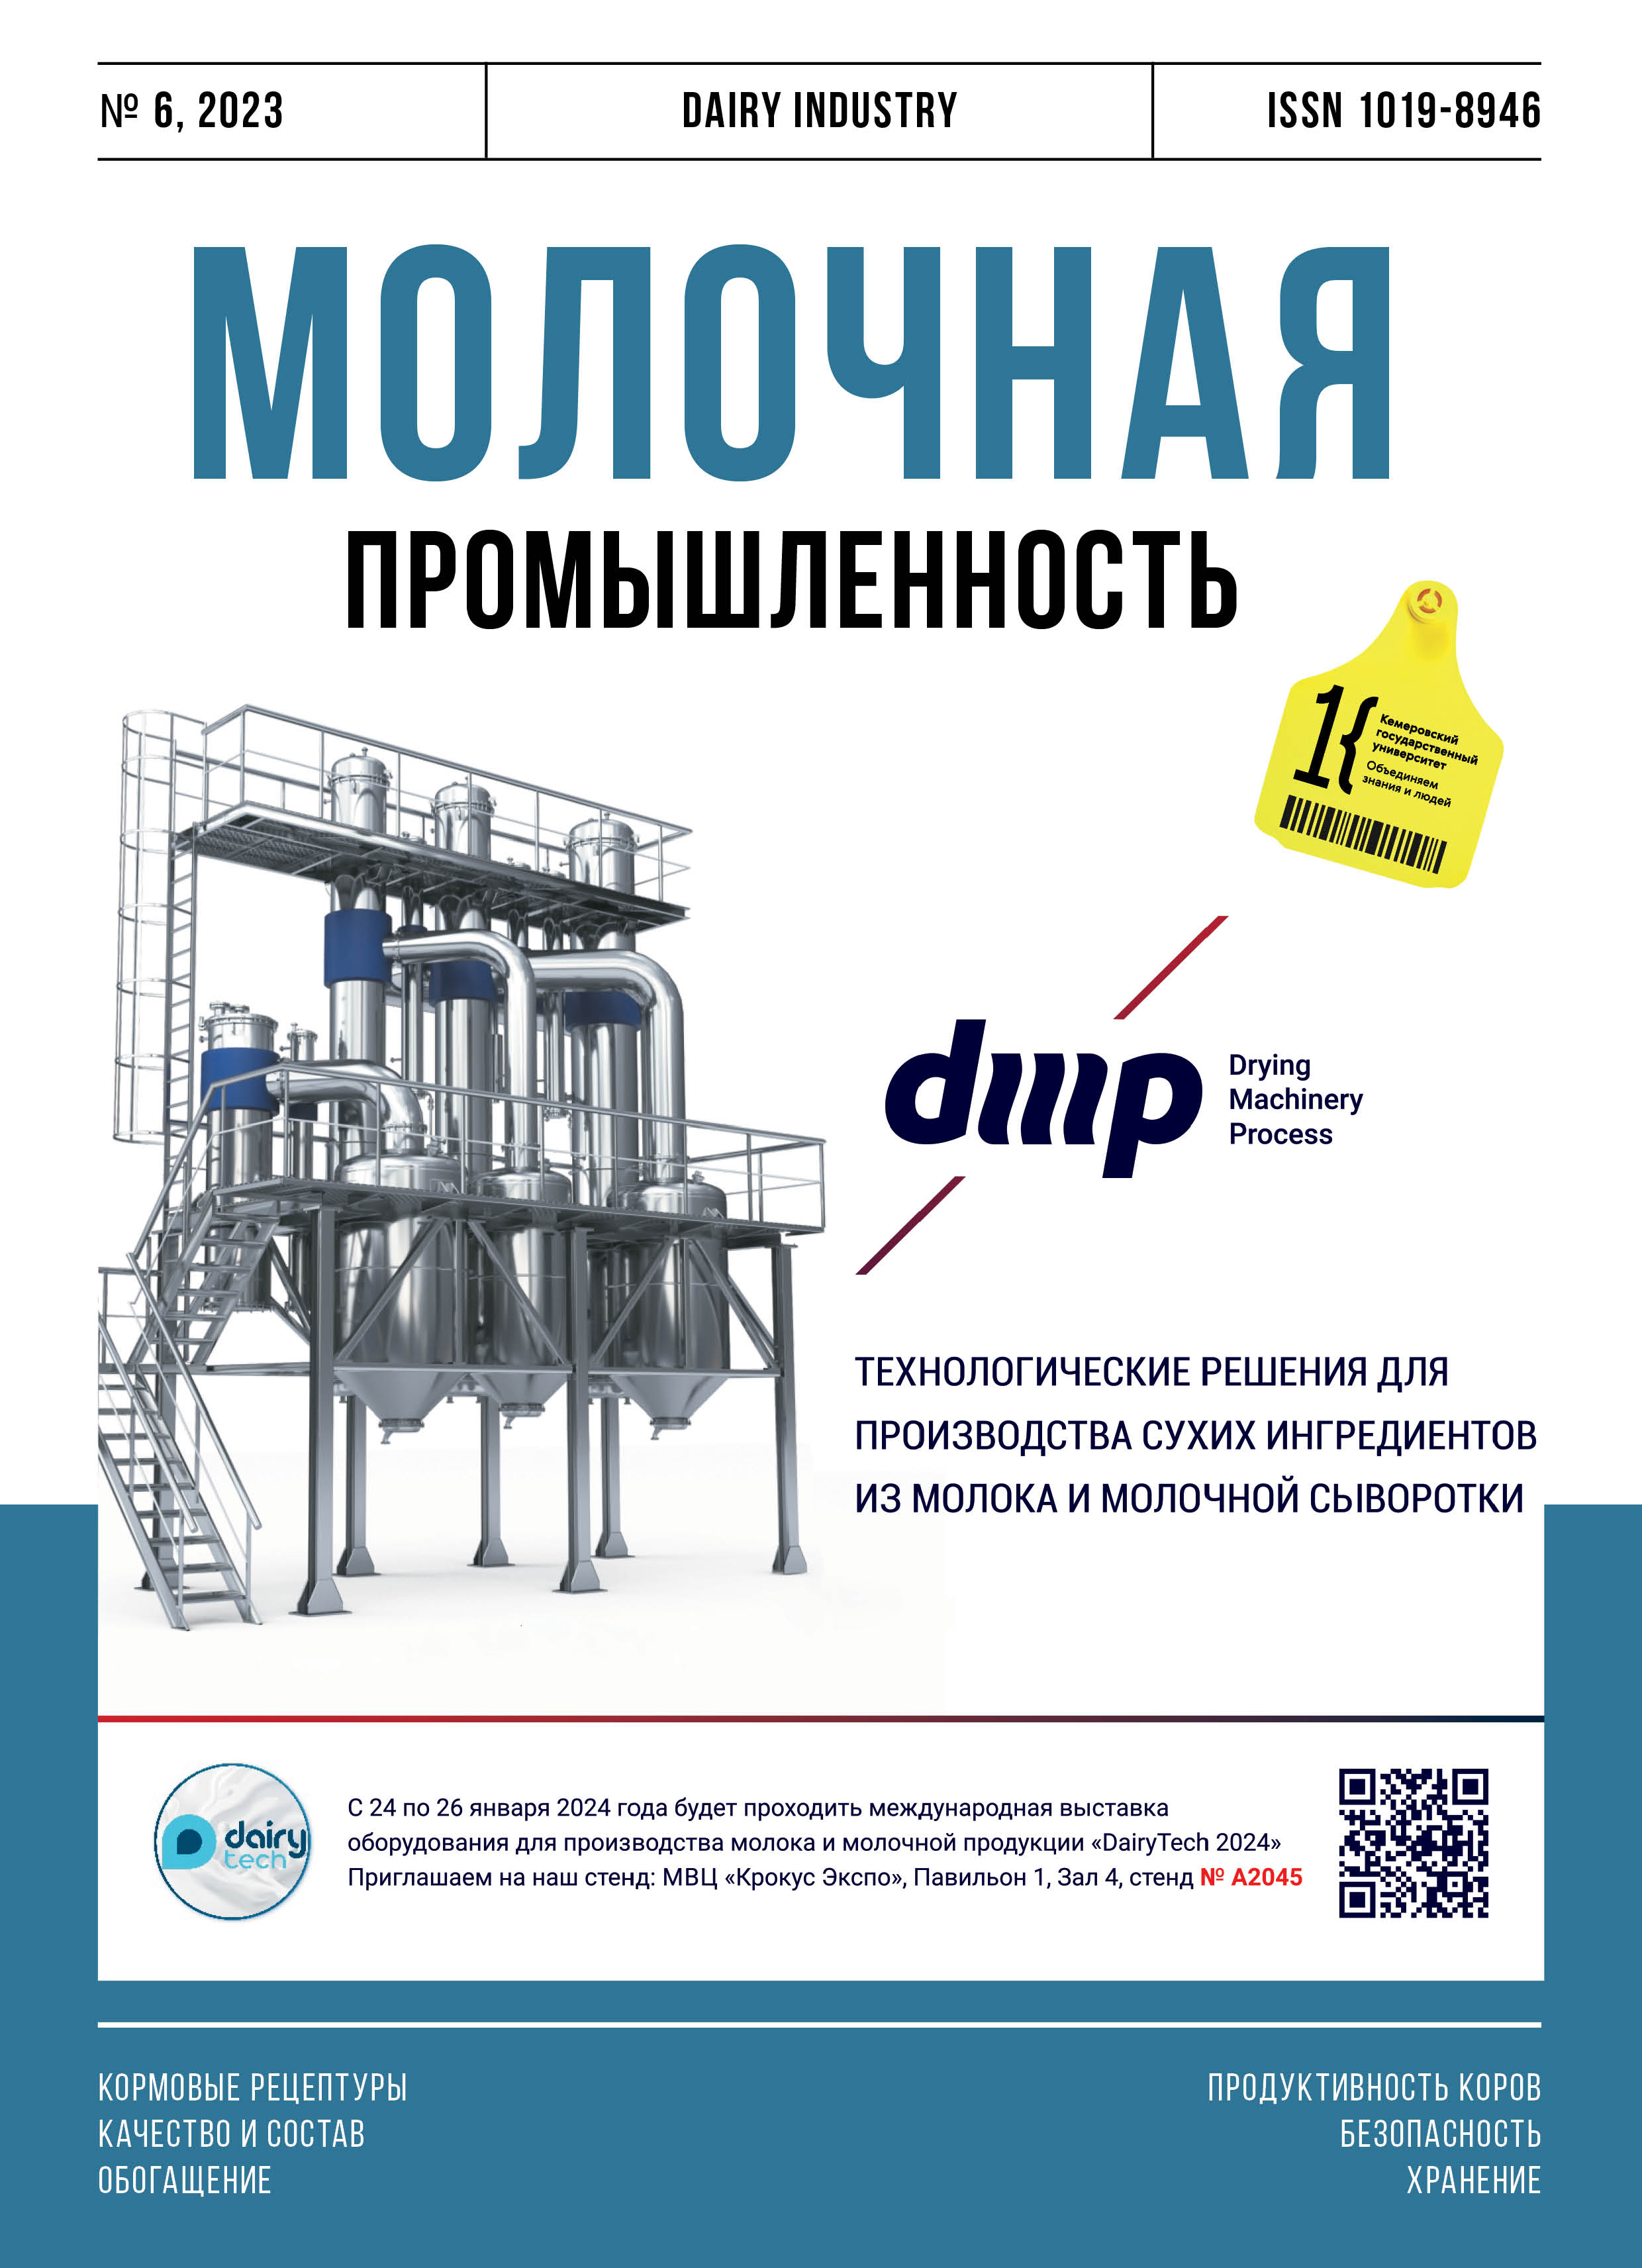                         Study of the possibility of using chlorine dioxide for disinfection of equipment in the dairy industry
            